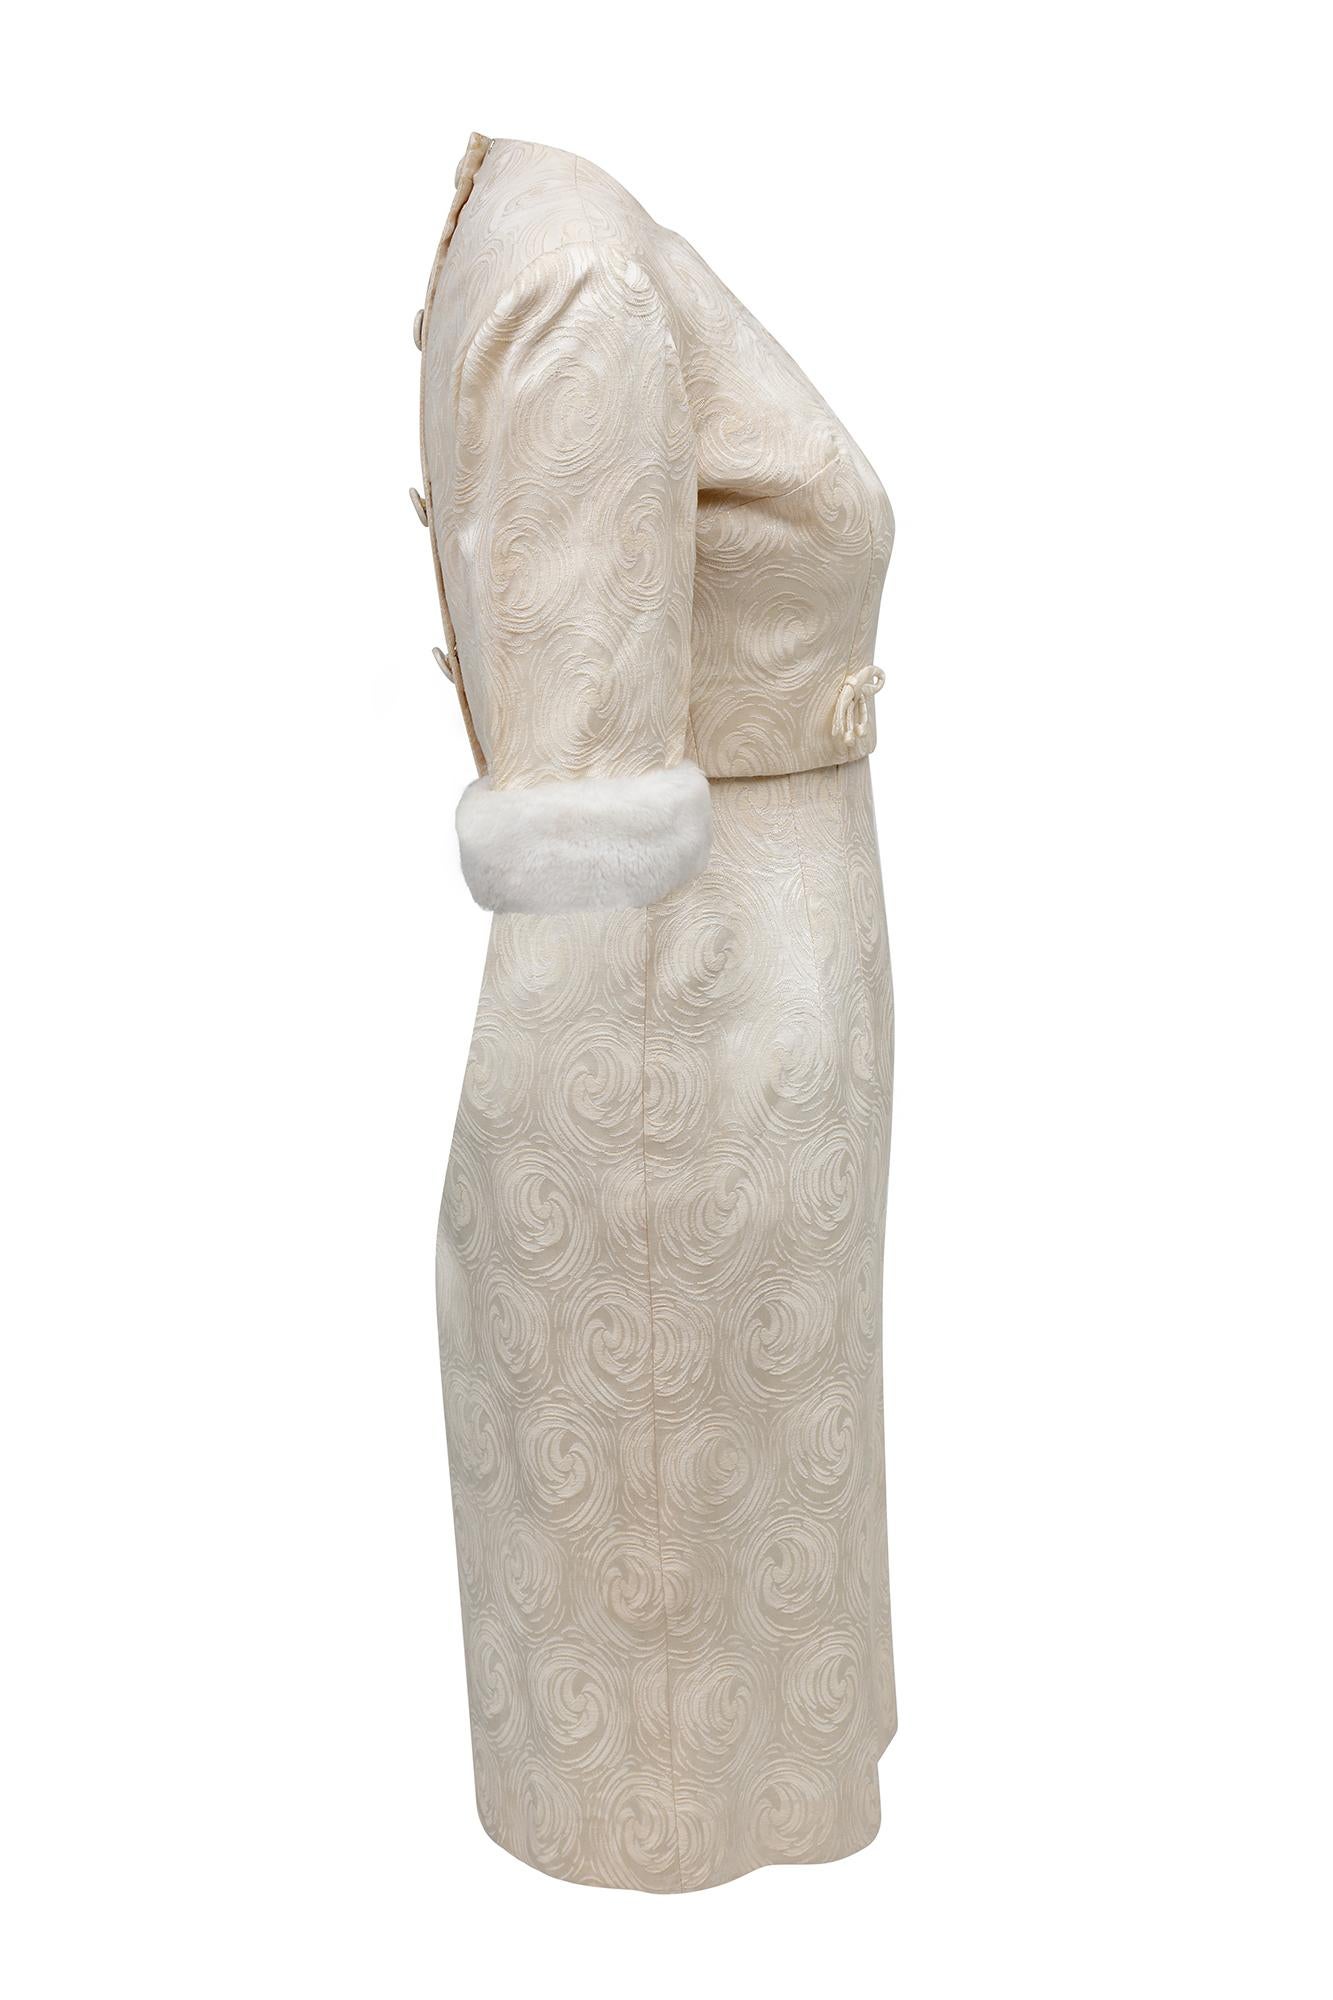 This glamorous early 1960s ivory twin set is a real tribute to Jackie Kennedy's iconic signature look during this era. The brand is Carol Brent, a deeply popular ready to wear brand from America's first ever mail order company Montgomery Ward. The